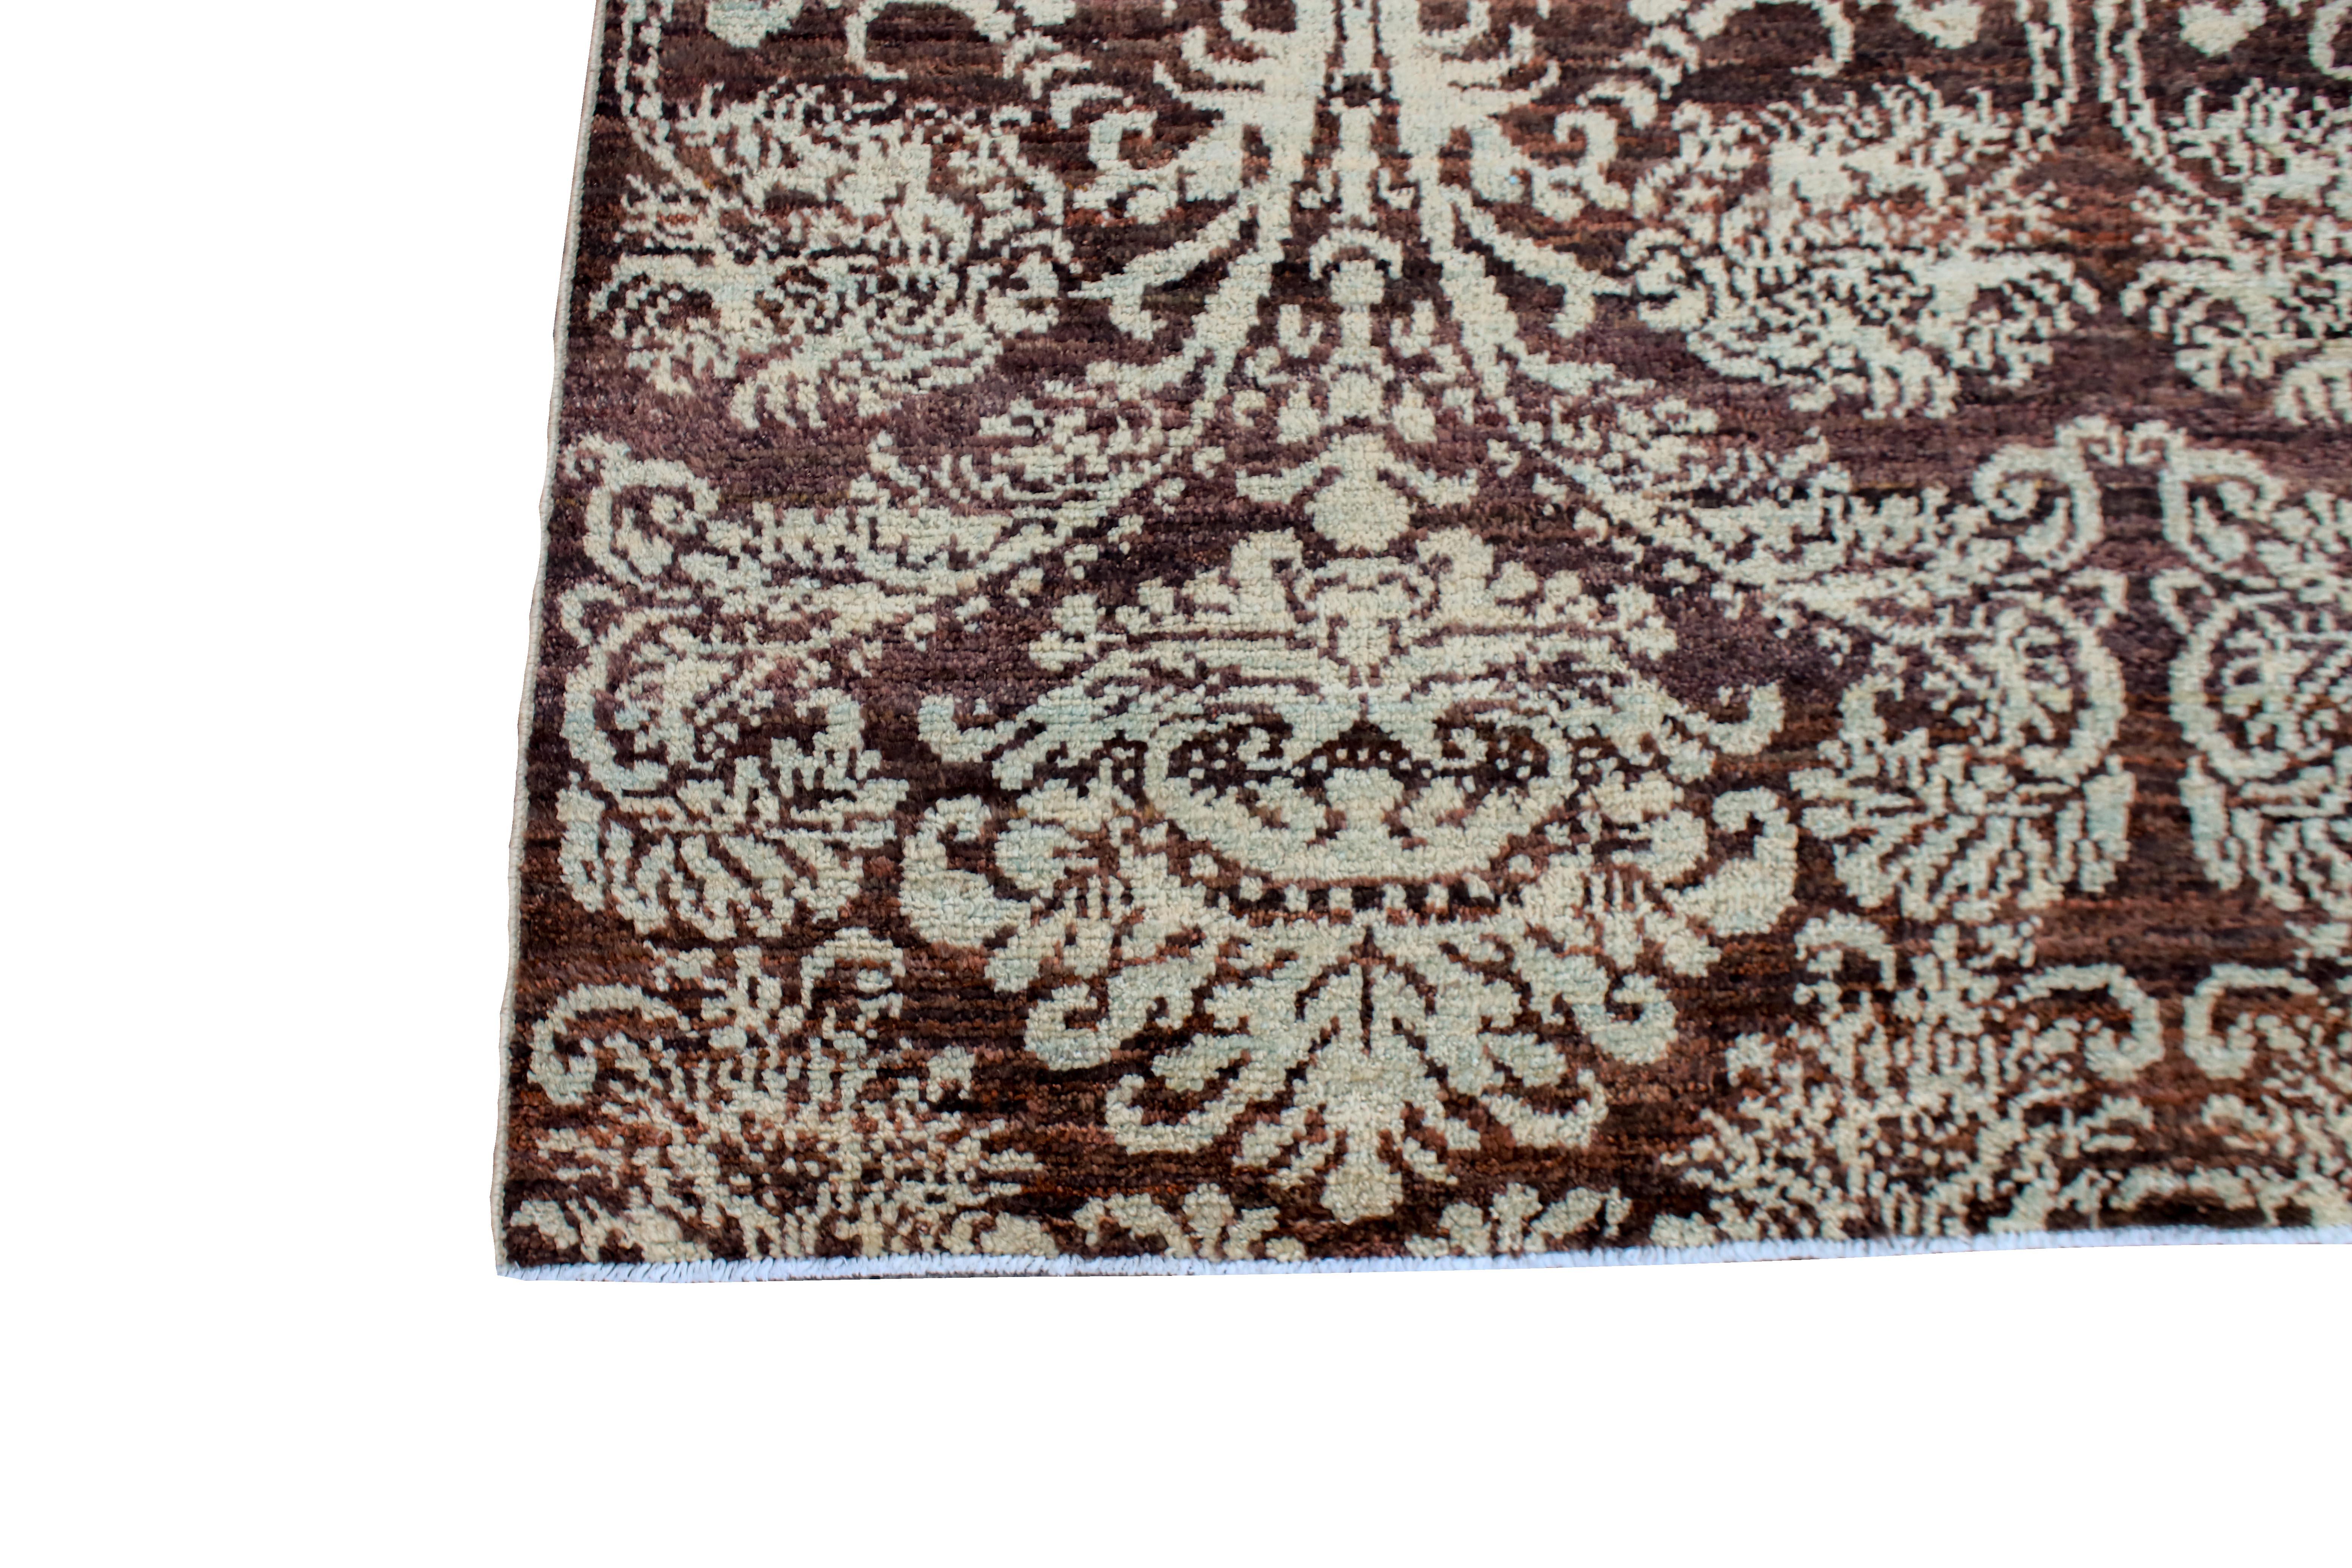 Afghan brown floral motif designed 10 x 14 rug.
Hand knotted with hand-spun wool, woven in Afghanistan.
This beautifully designed rug will be sure to stand out in any room. Measures: 10’7’ x 13’1